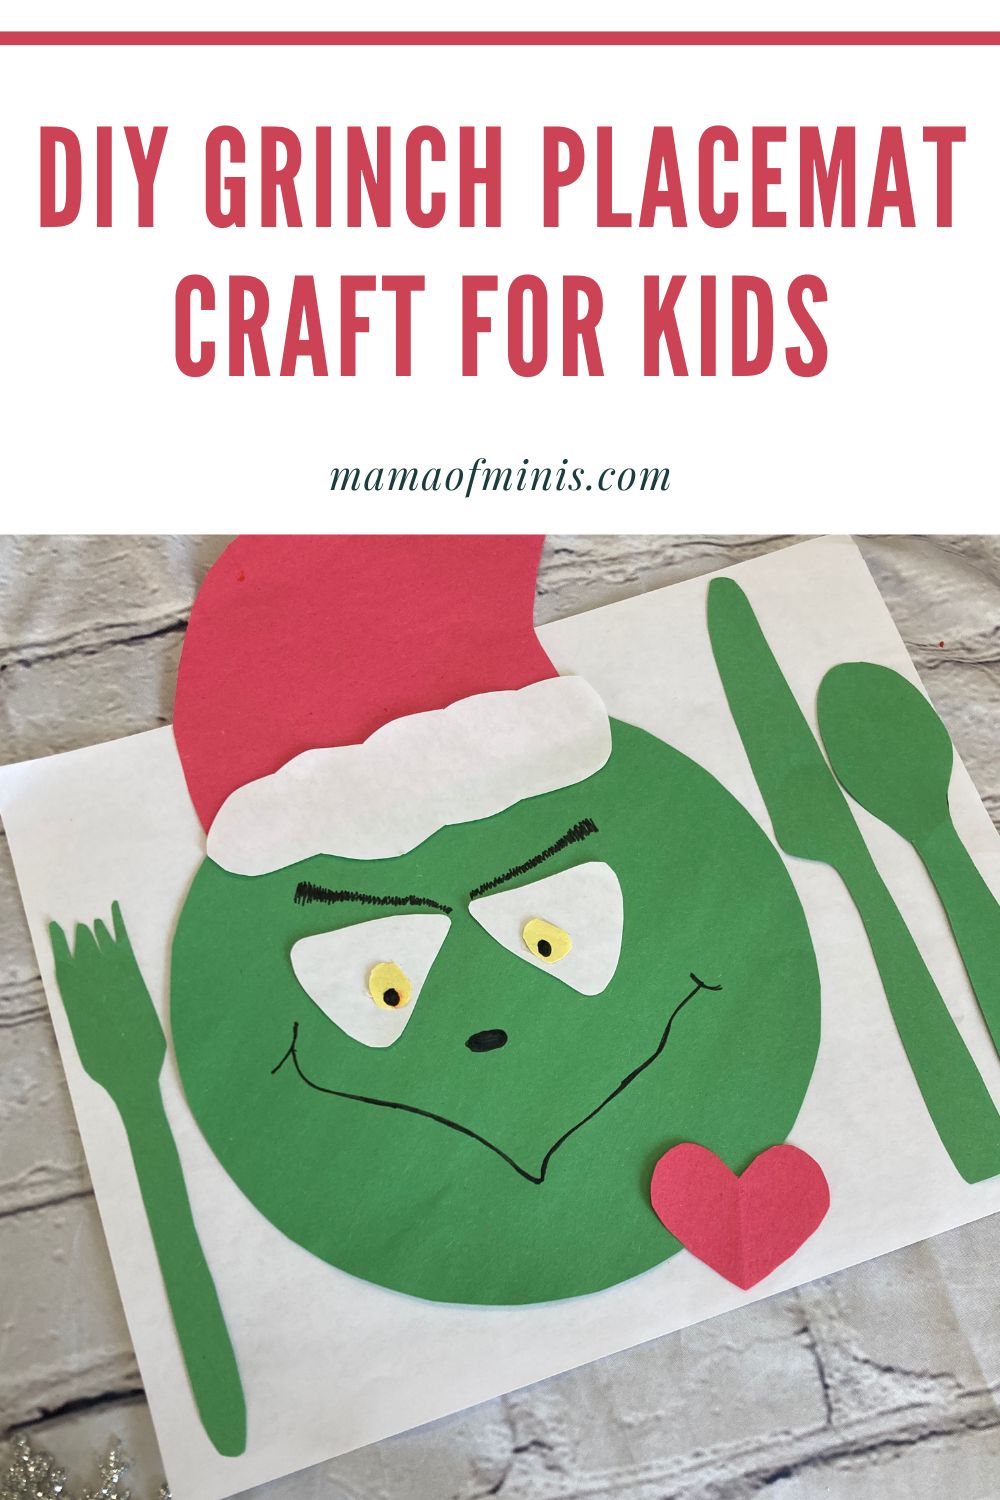 Festive DIY Grinch Placemat Craft for Kids Pin